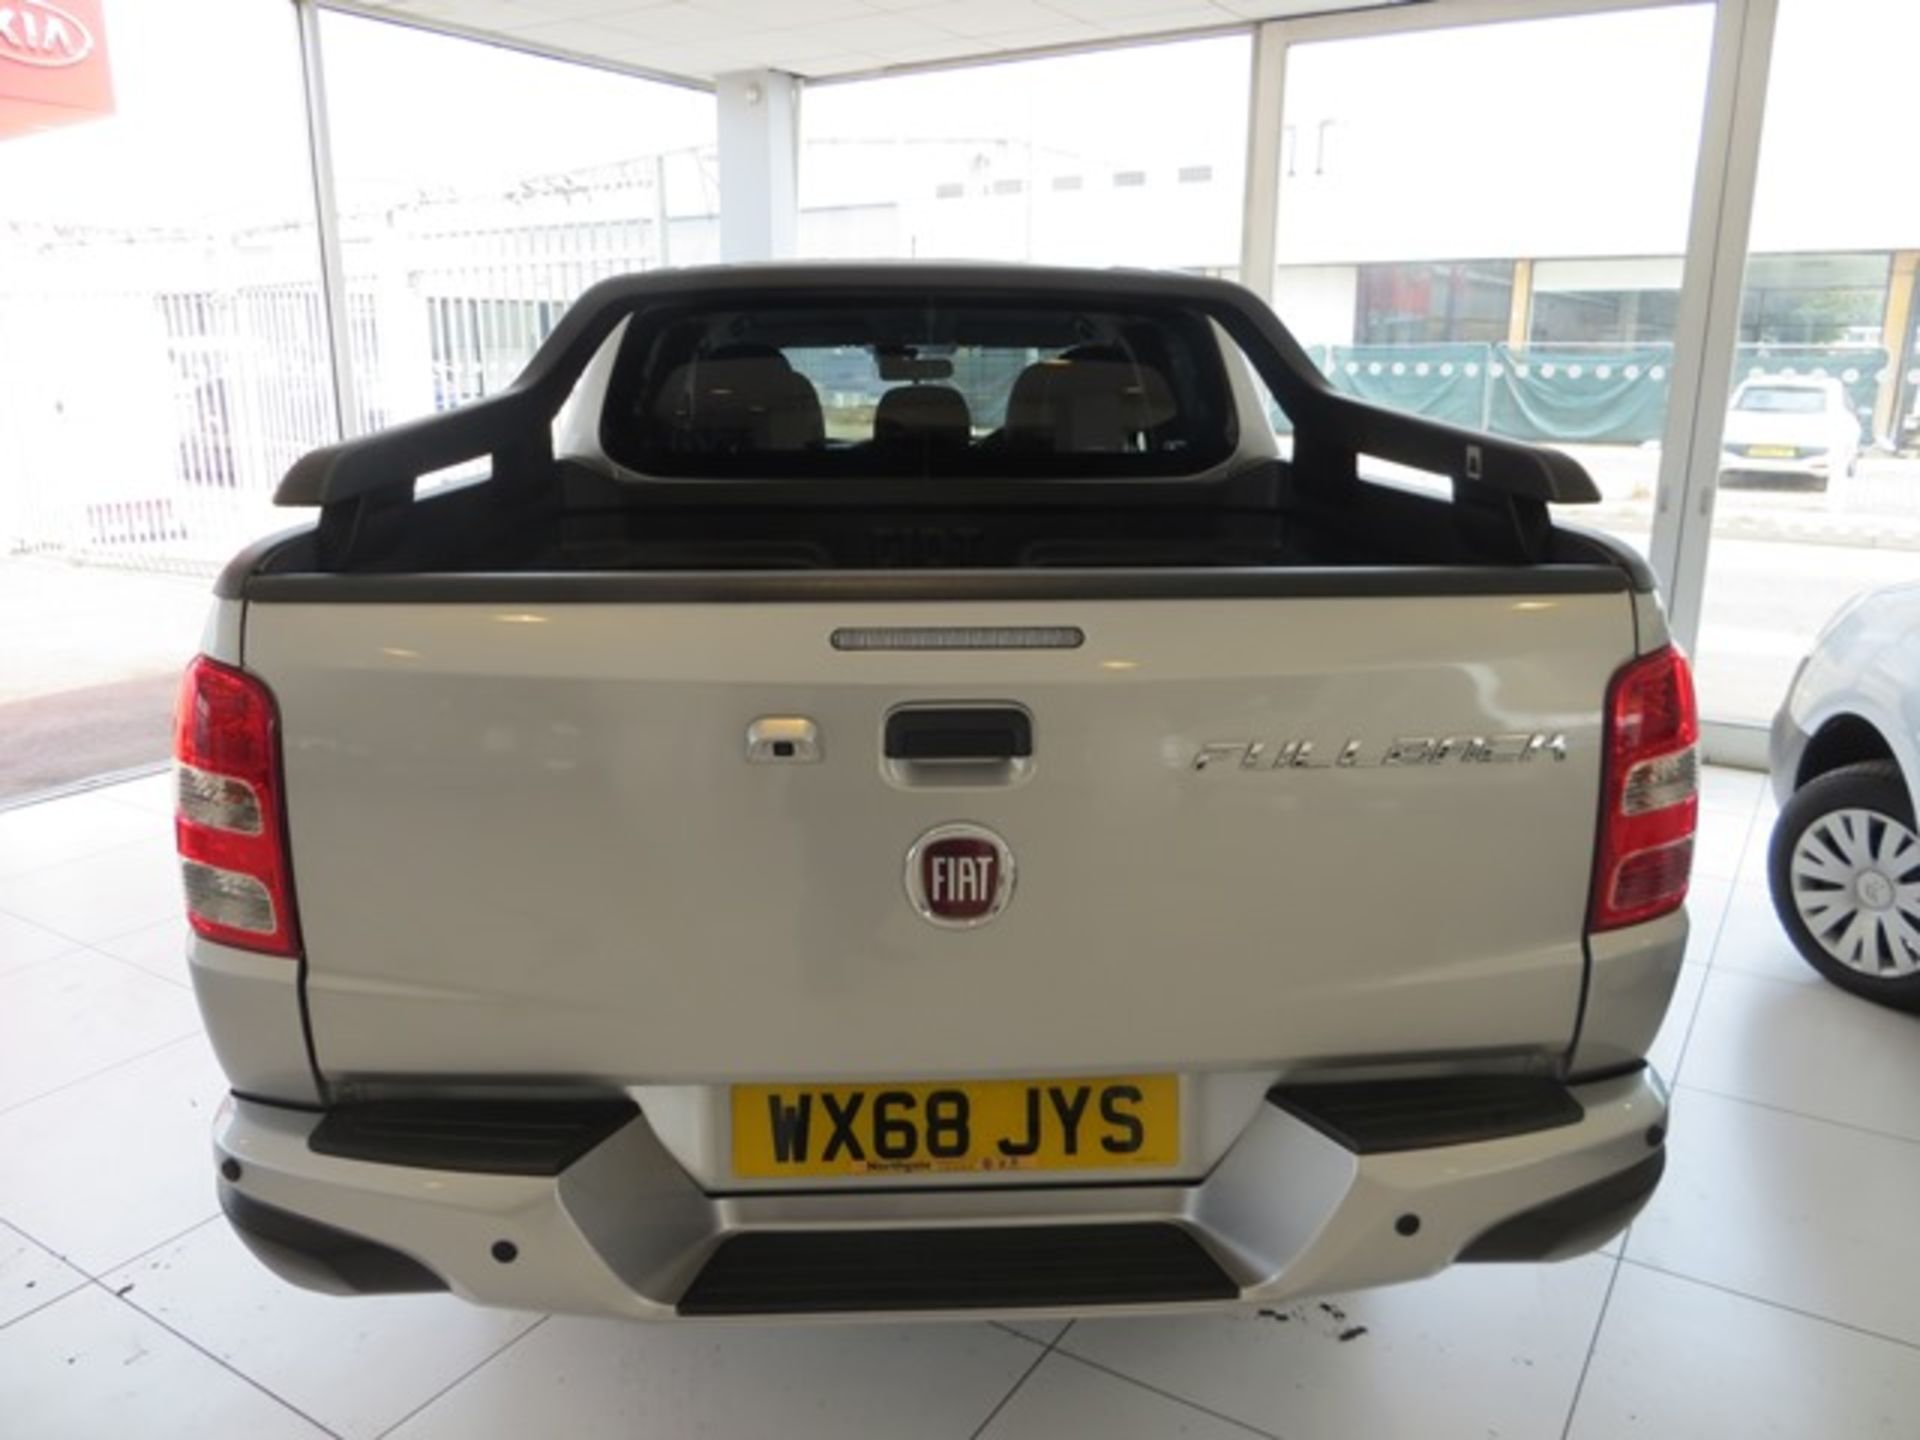 Fiat Full Back Cross 2.4 D Double Cab diesel pick up 4X4 Metallic Silver 'Leather interior 17 inch - Image 3 of 10